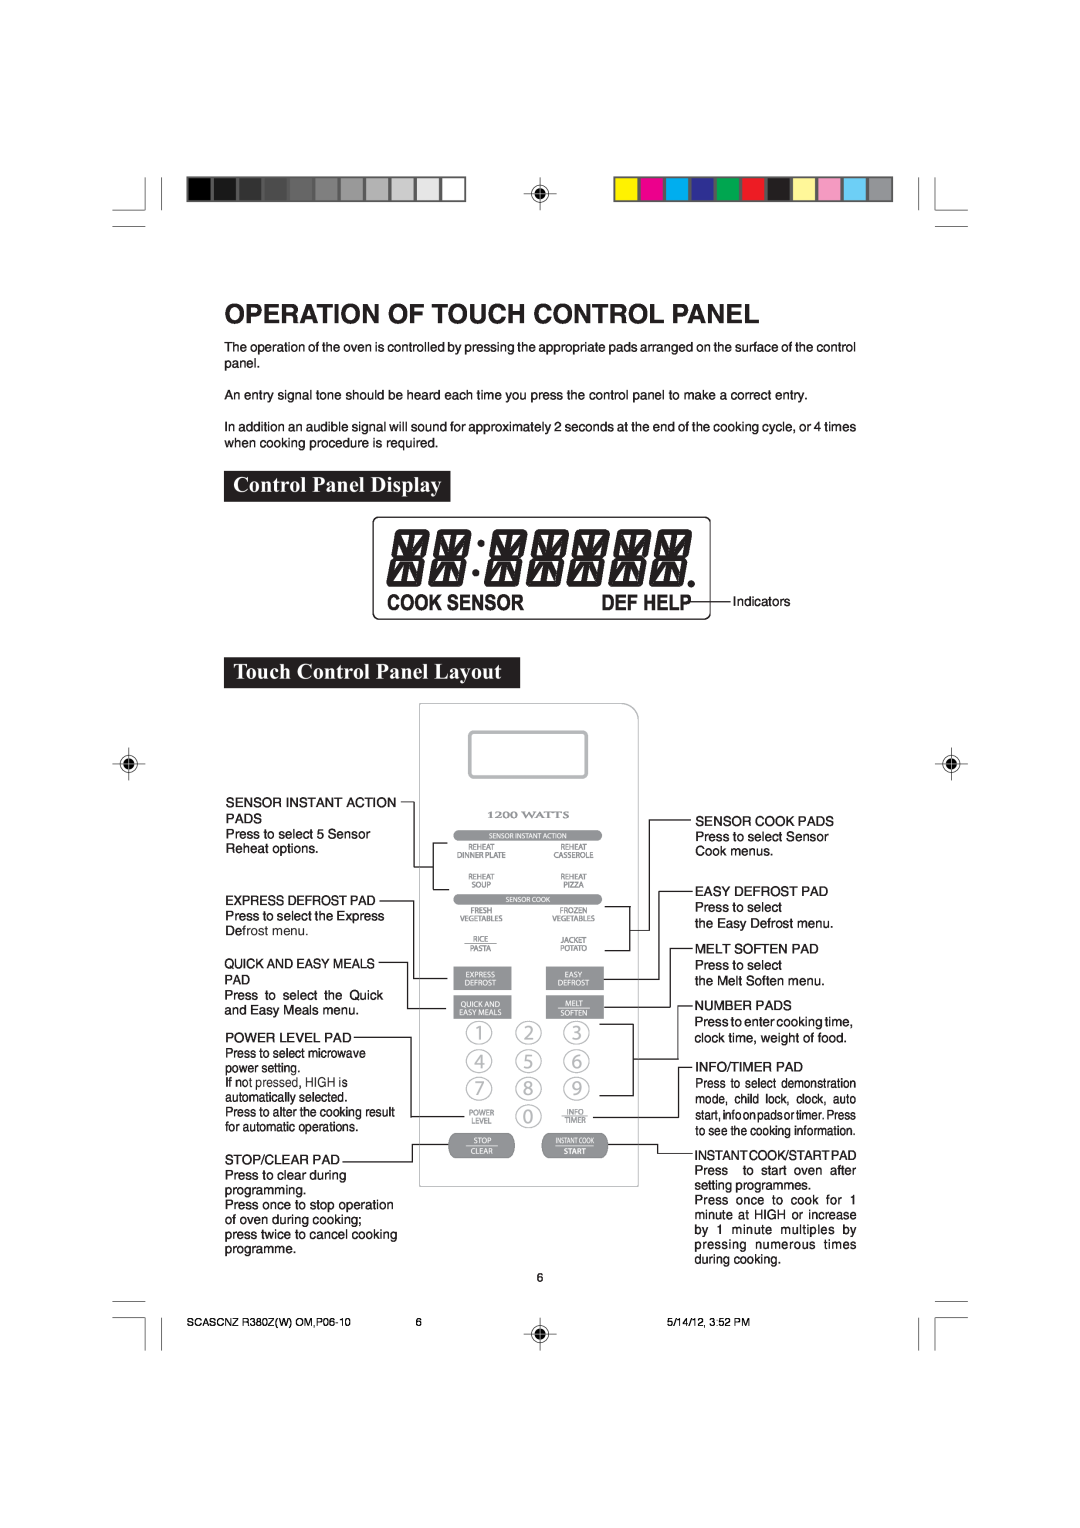 Sharp R-380Z(W) operation manual Operation Of Touch Control Panel, Control Panel Display, Touch Control Panel Layout 